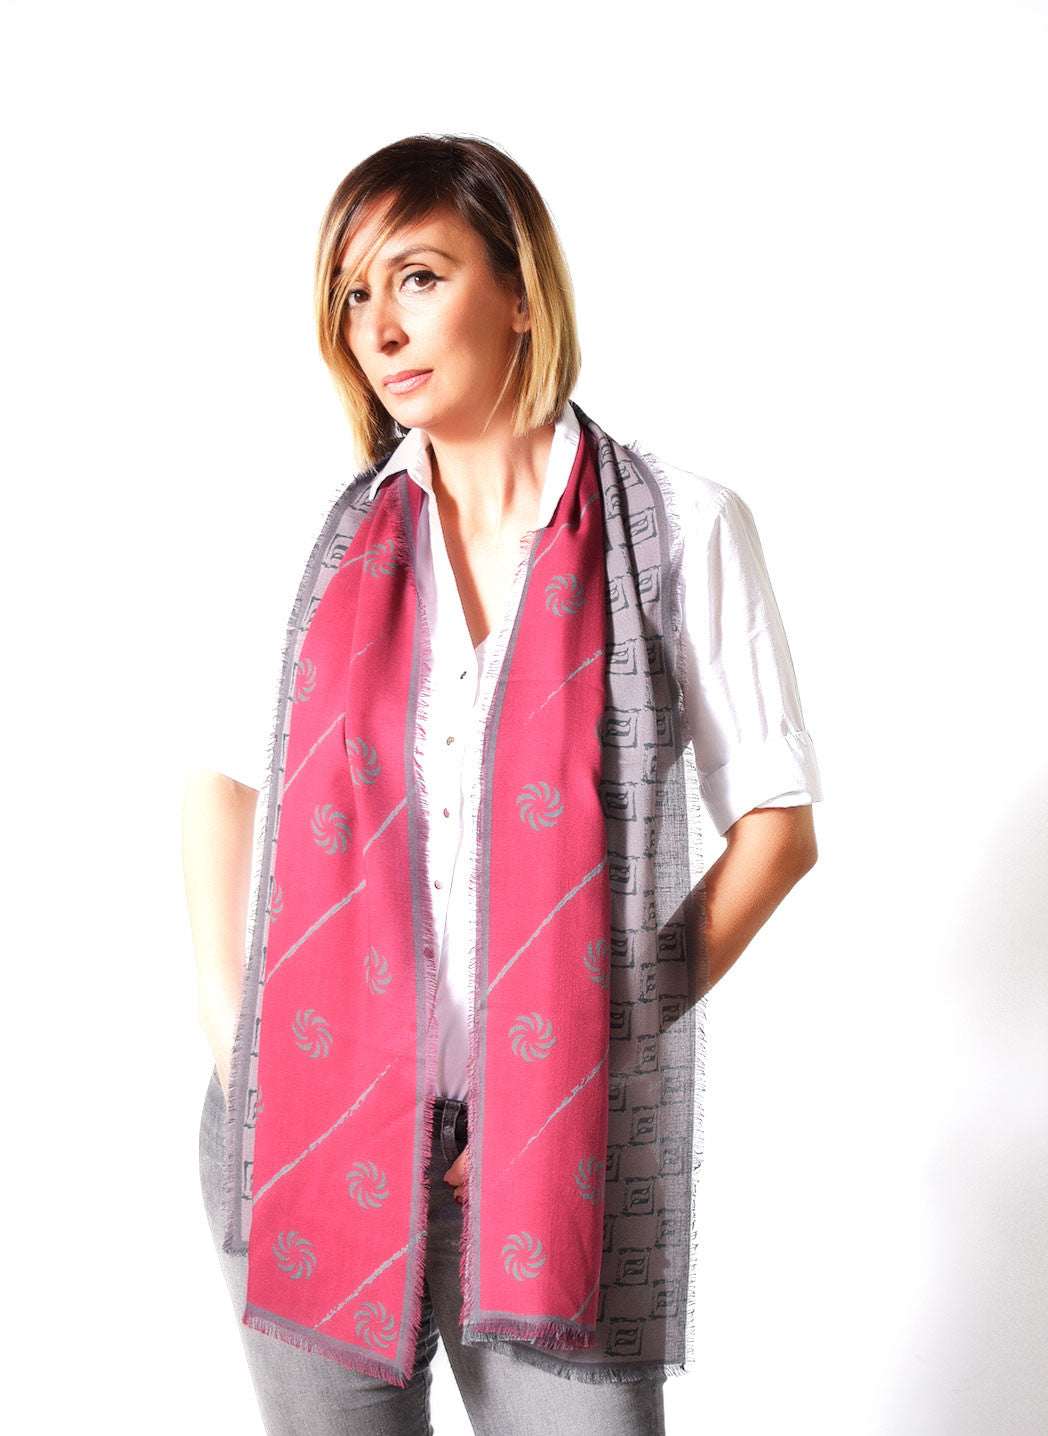 Eternity Burgundy Unisex Scarf - Anet's Collection - 5